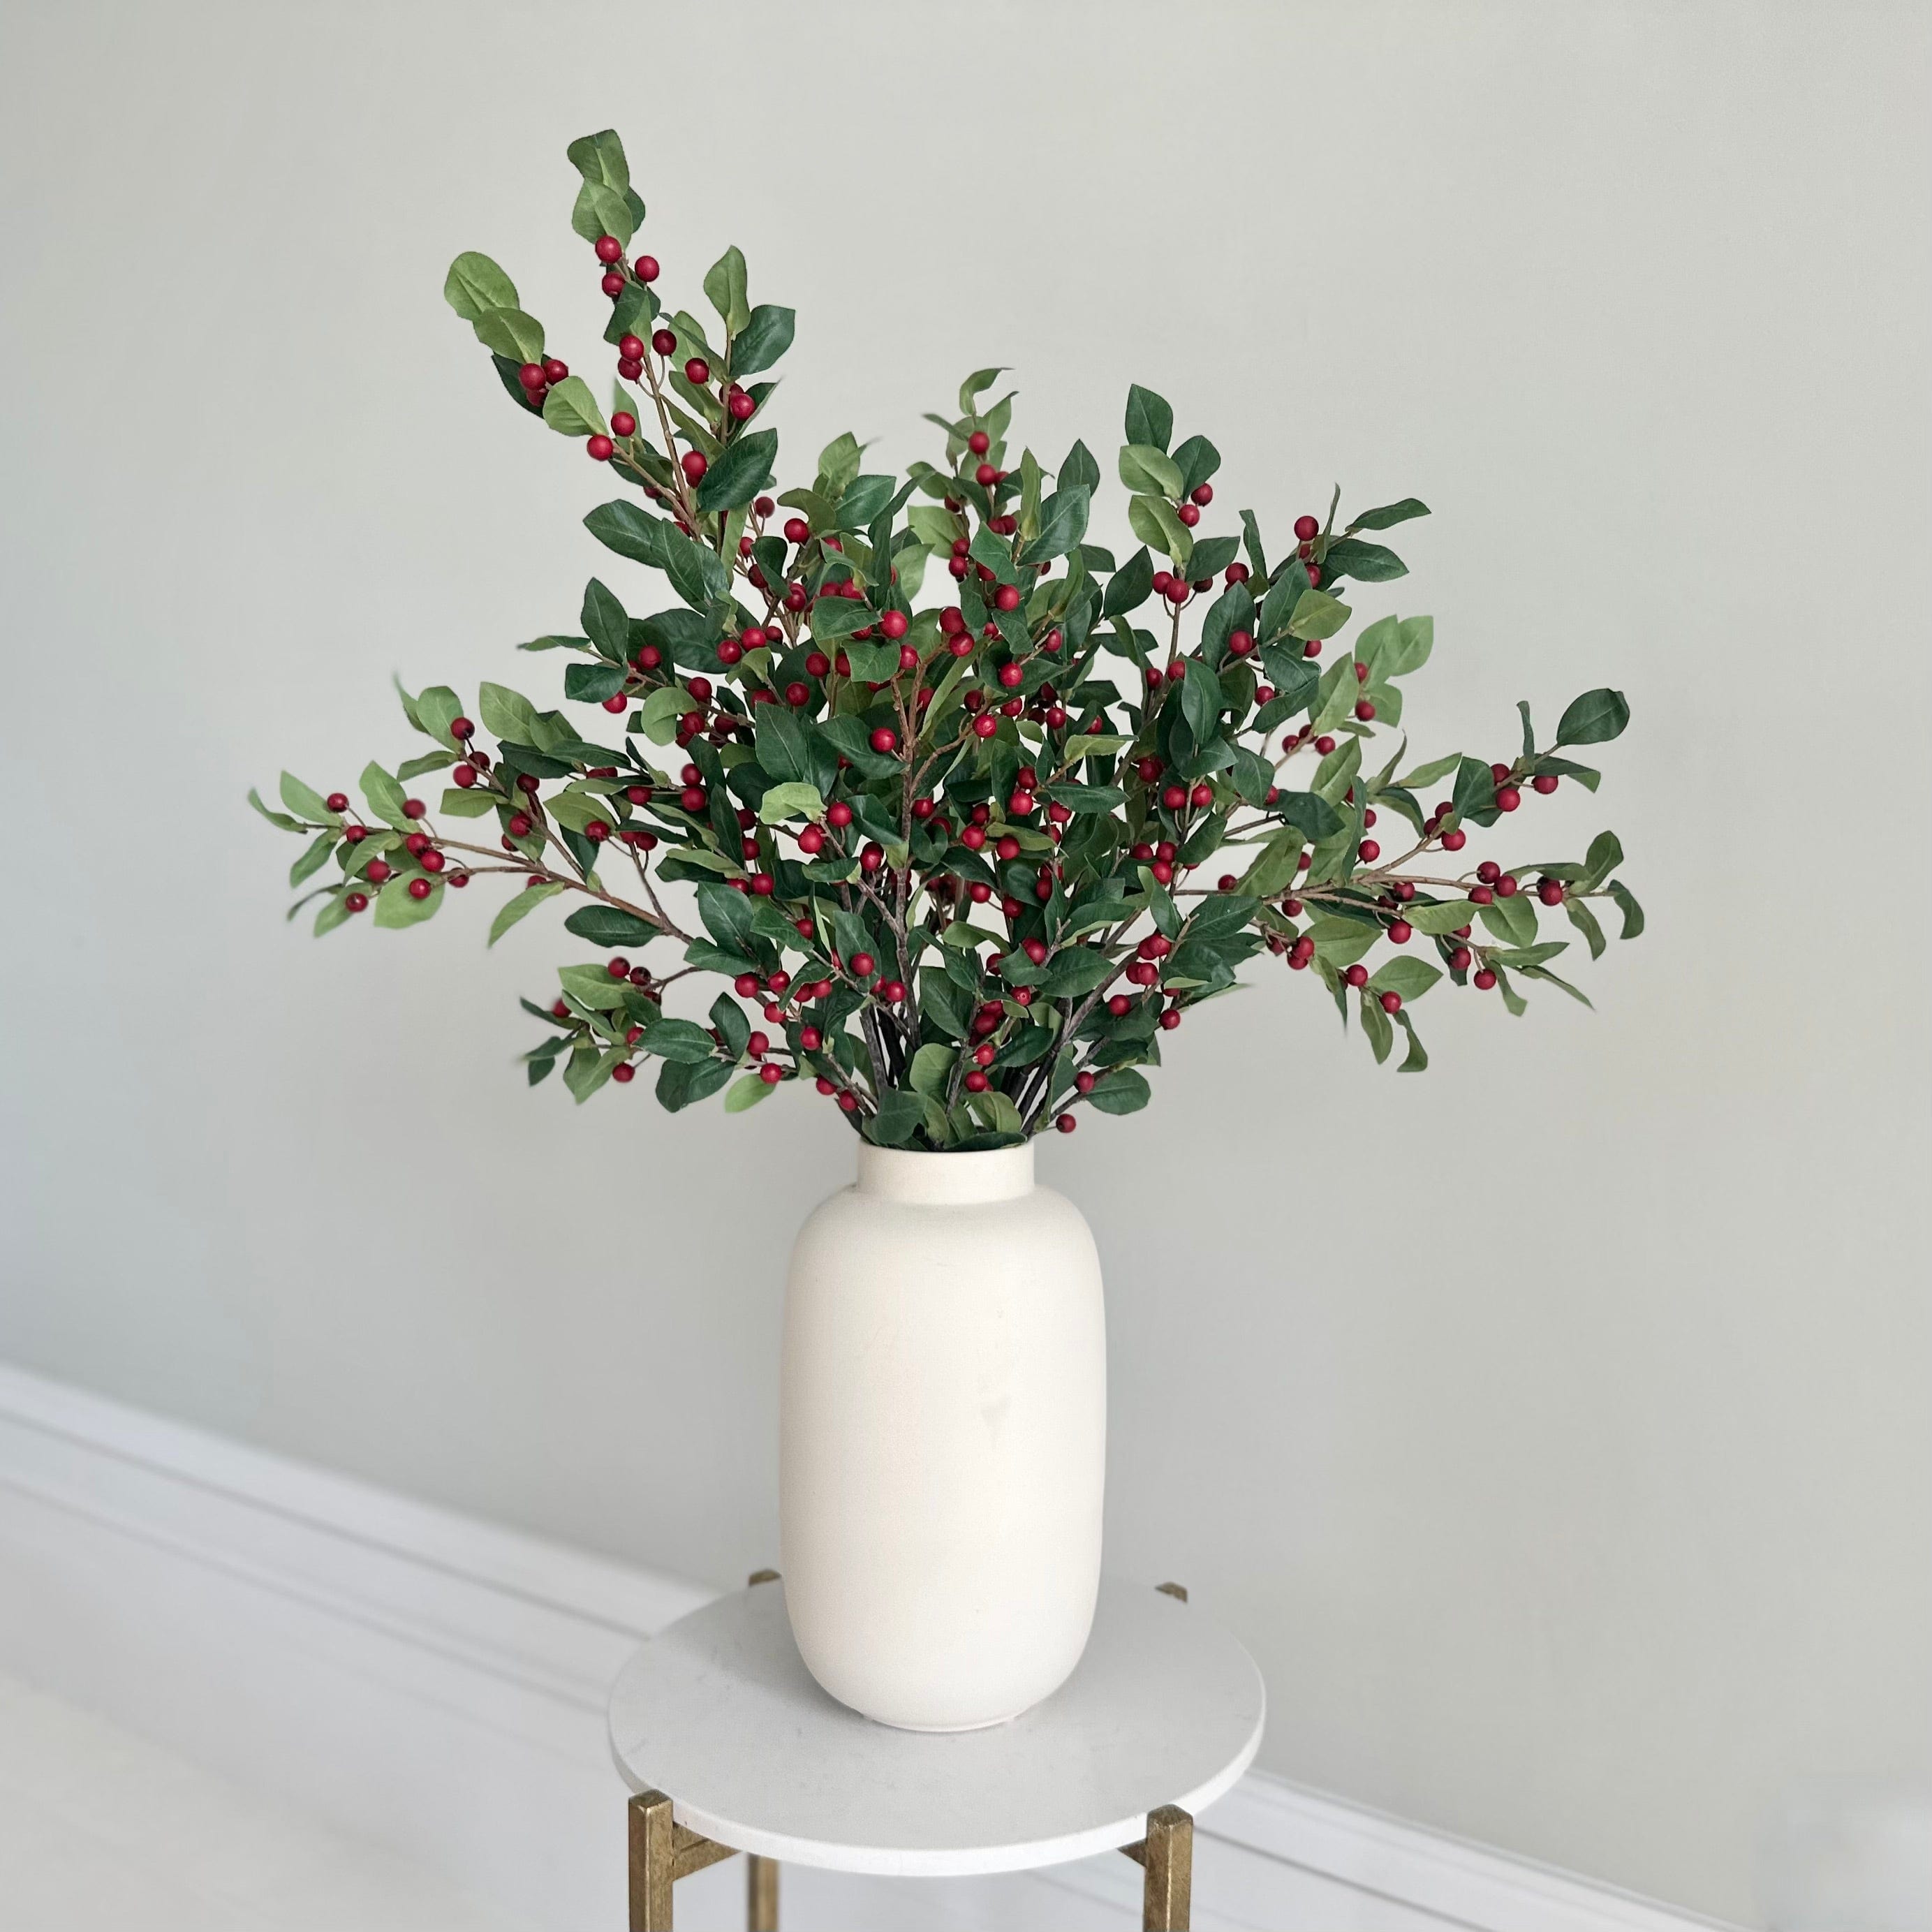 Artificial flowers luxury faux silk red berries with leaves Kingham Vase lifelike realistic faux flowers from The Faux Flower Company ABX0683RD ABP04B3